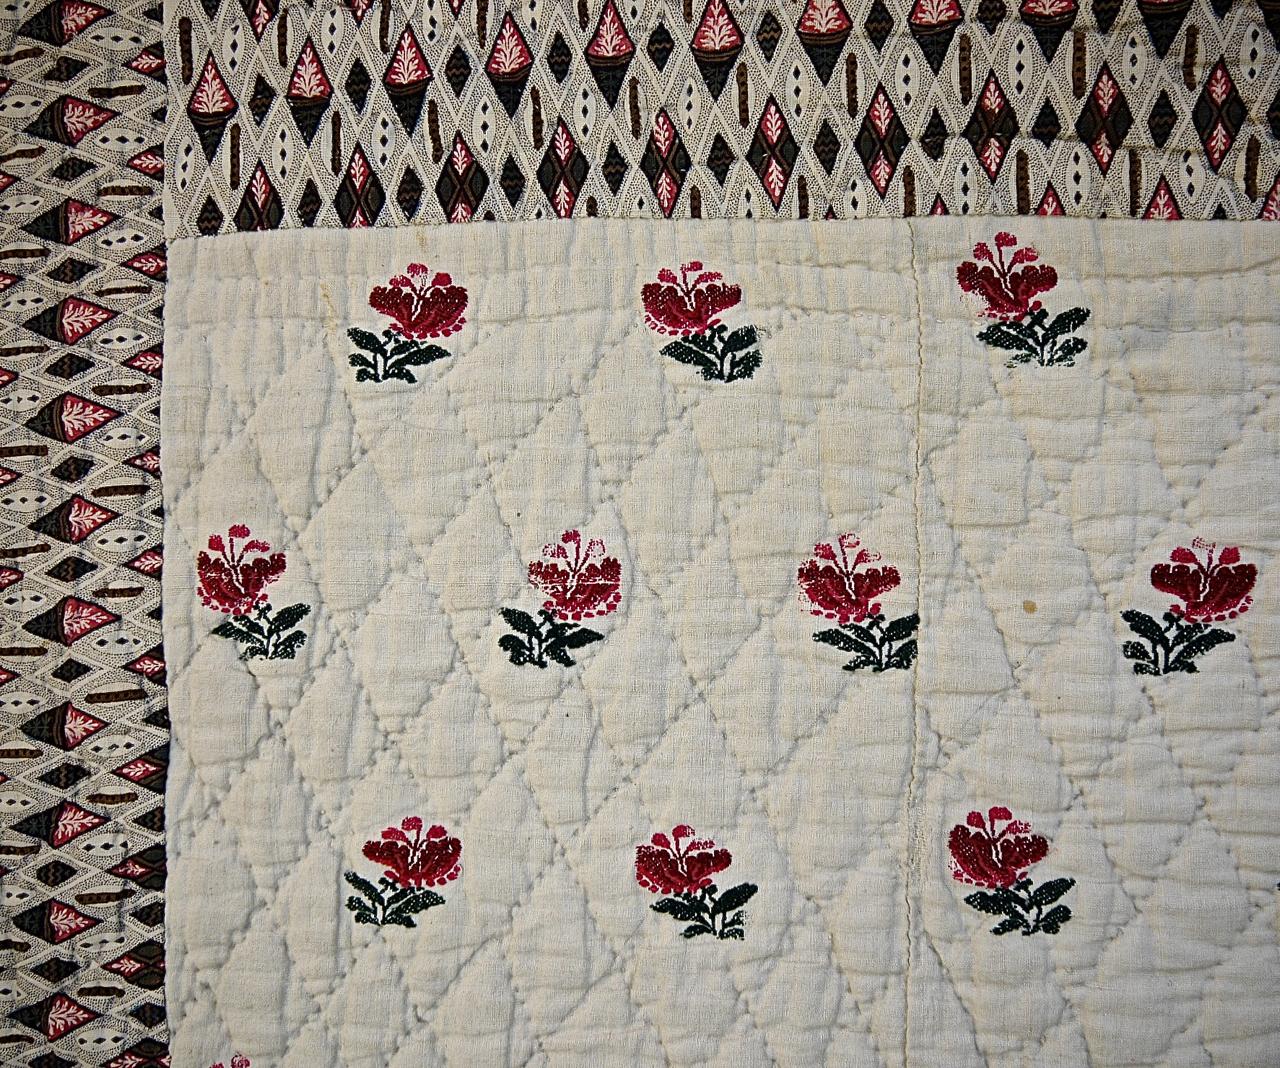 French late 18th century cambresine (wool woven on linen) quilt with a design of dark red and pink flowers with green leaves. Simply quilted with a diamond pattern. Bordered on four sides by a circa 1790s blockprinted design based on diamonds and